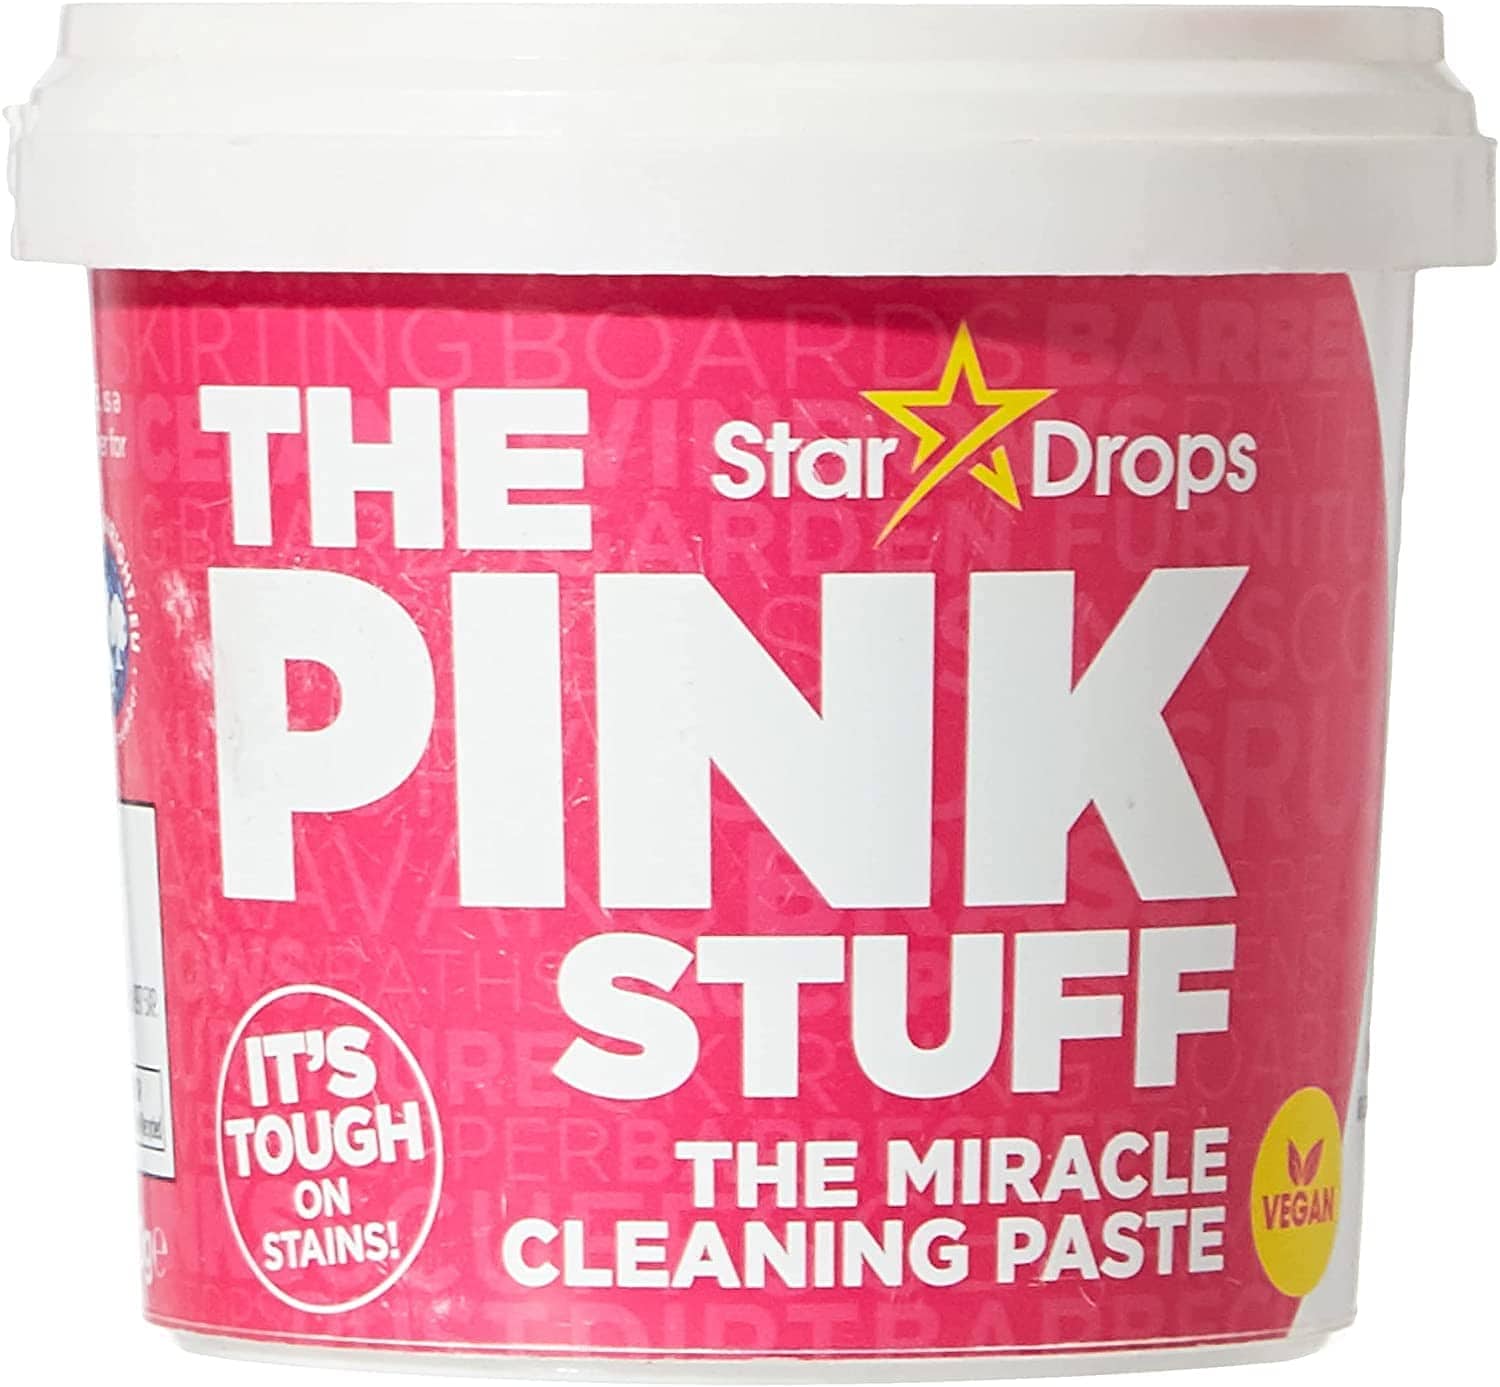 Stardrops Pink stuff The Miracle Multi-Purpose Cleaner 750ml Spray WHIGT,  26 fl